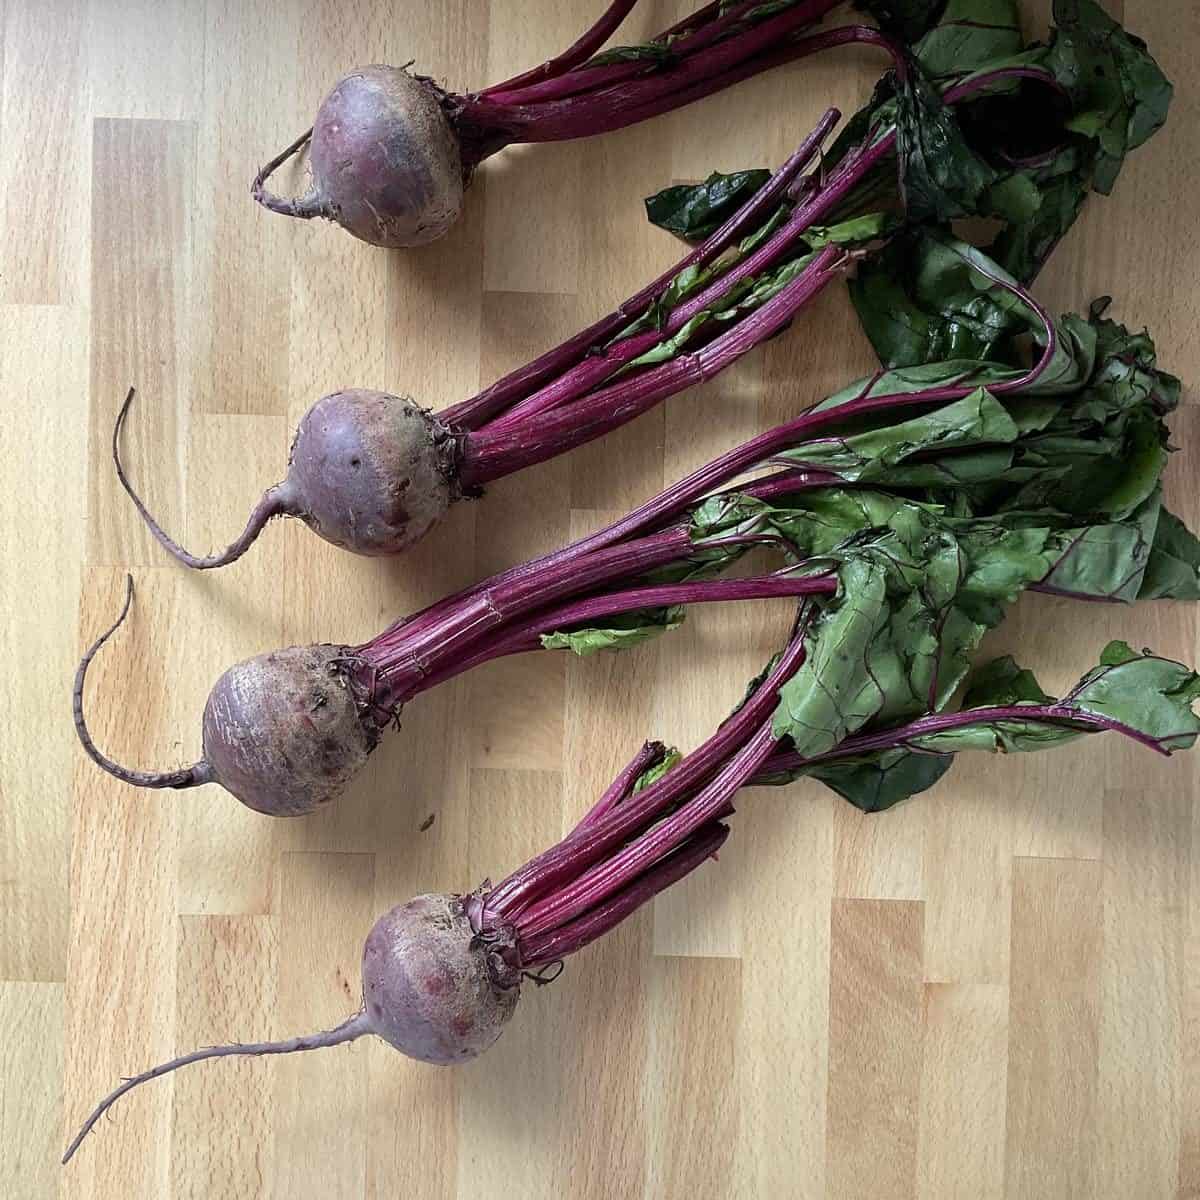 Fresh red beets with beet greens still attached on a cutting board.